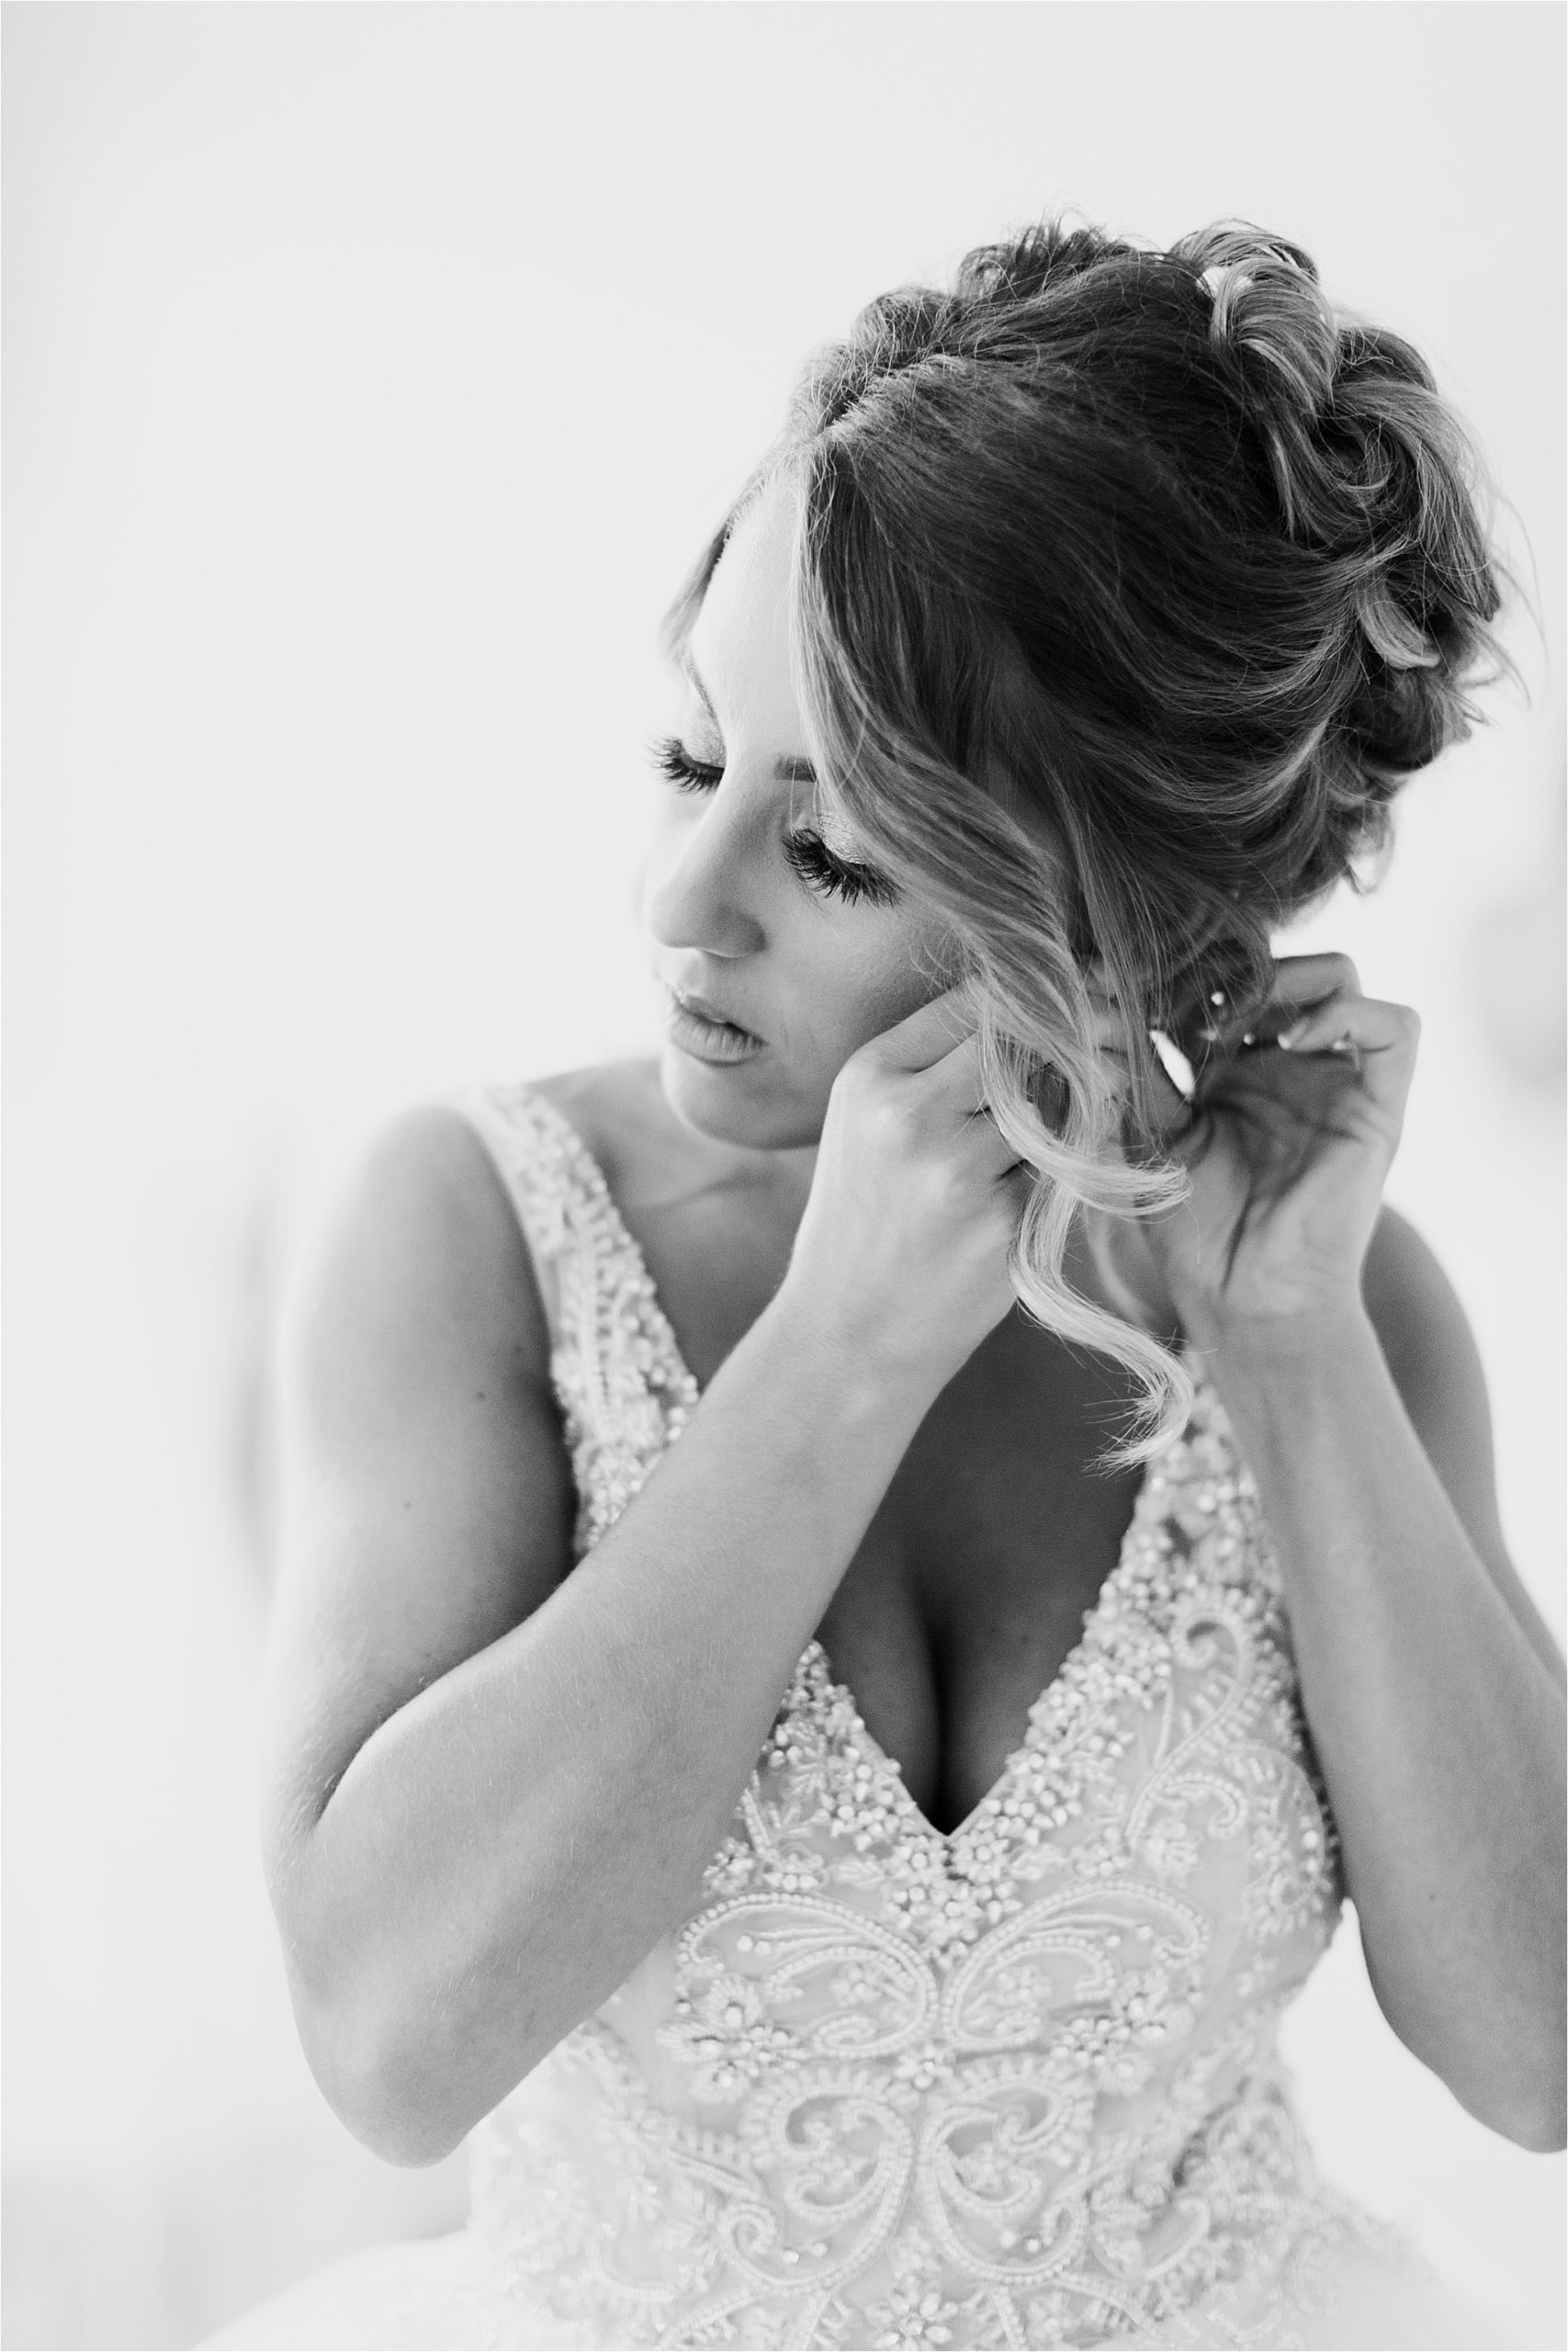 black and white photo of bride getting ready before wedding